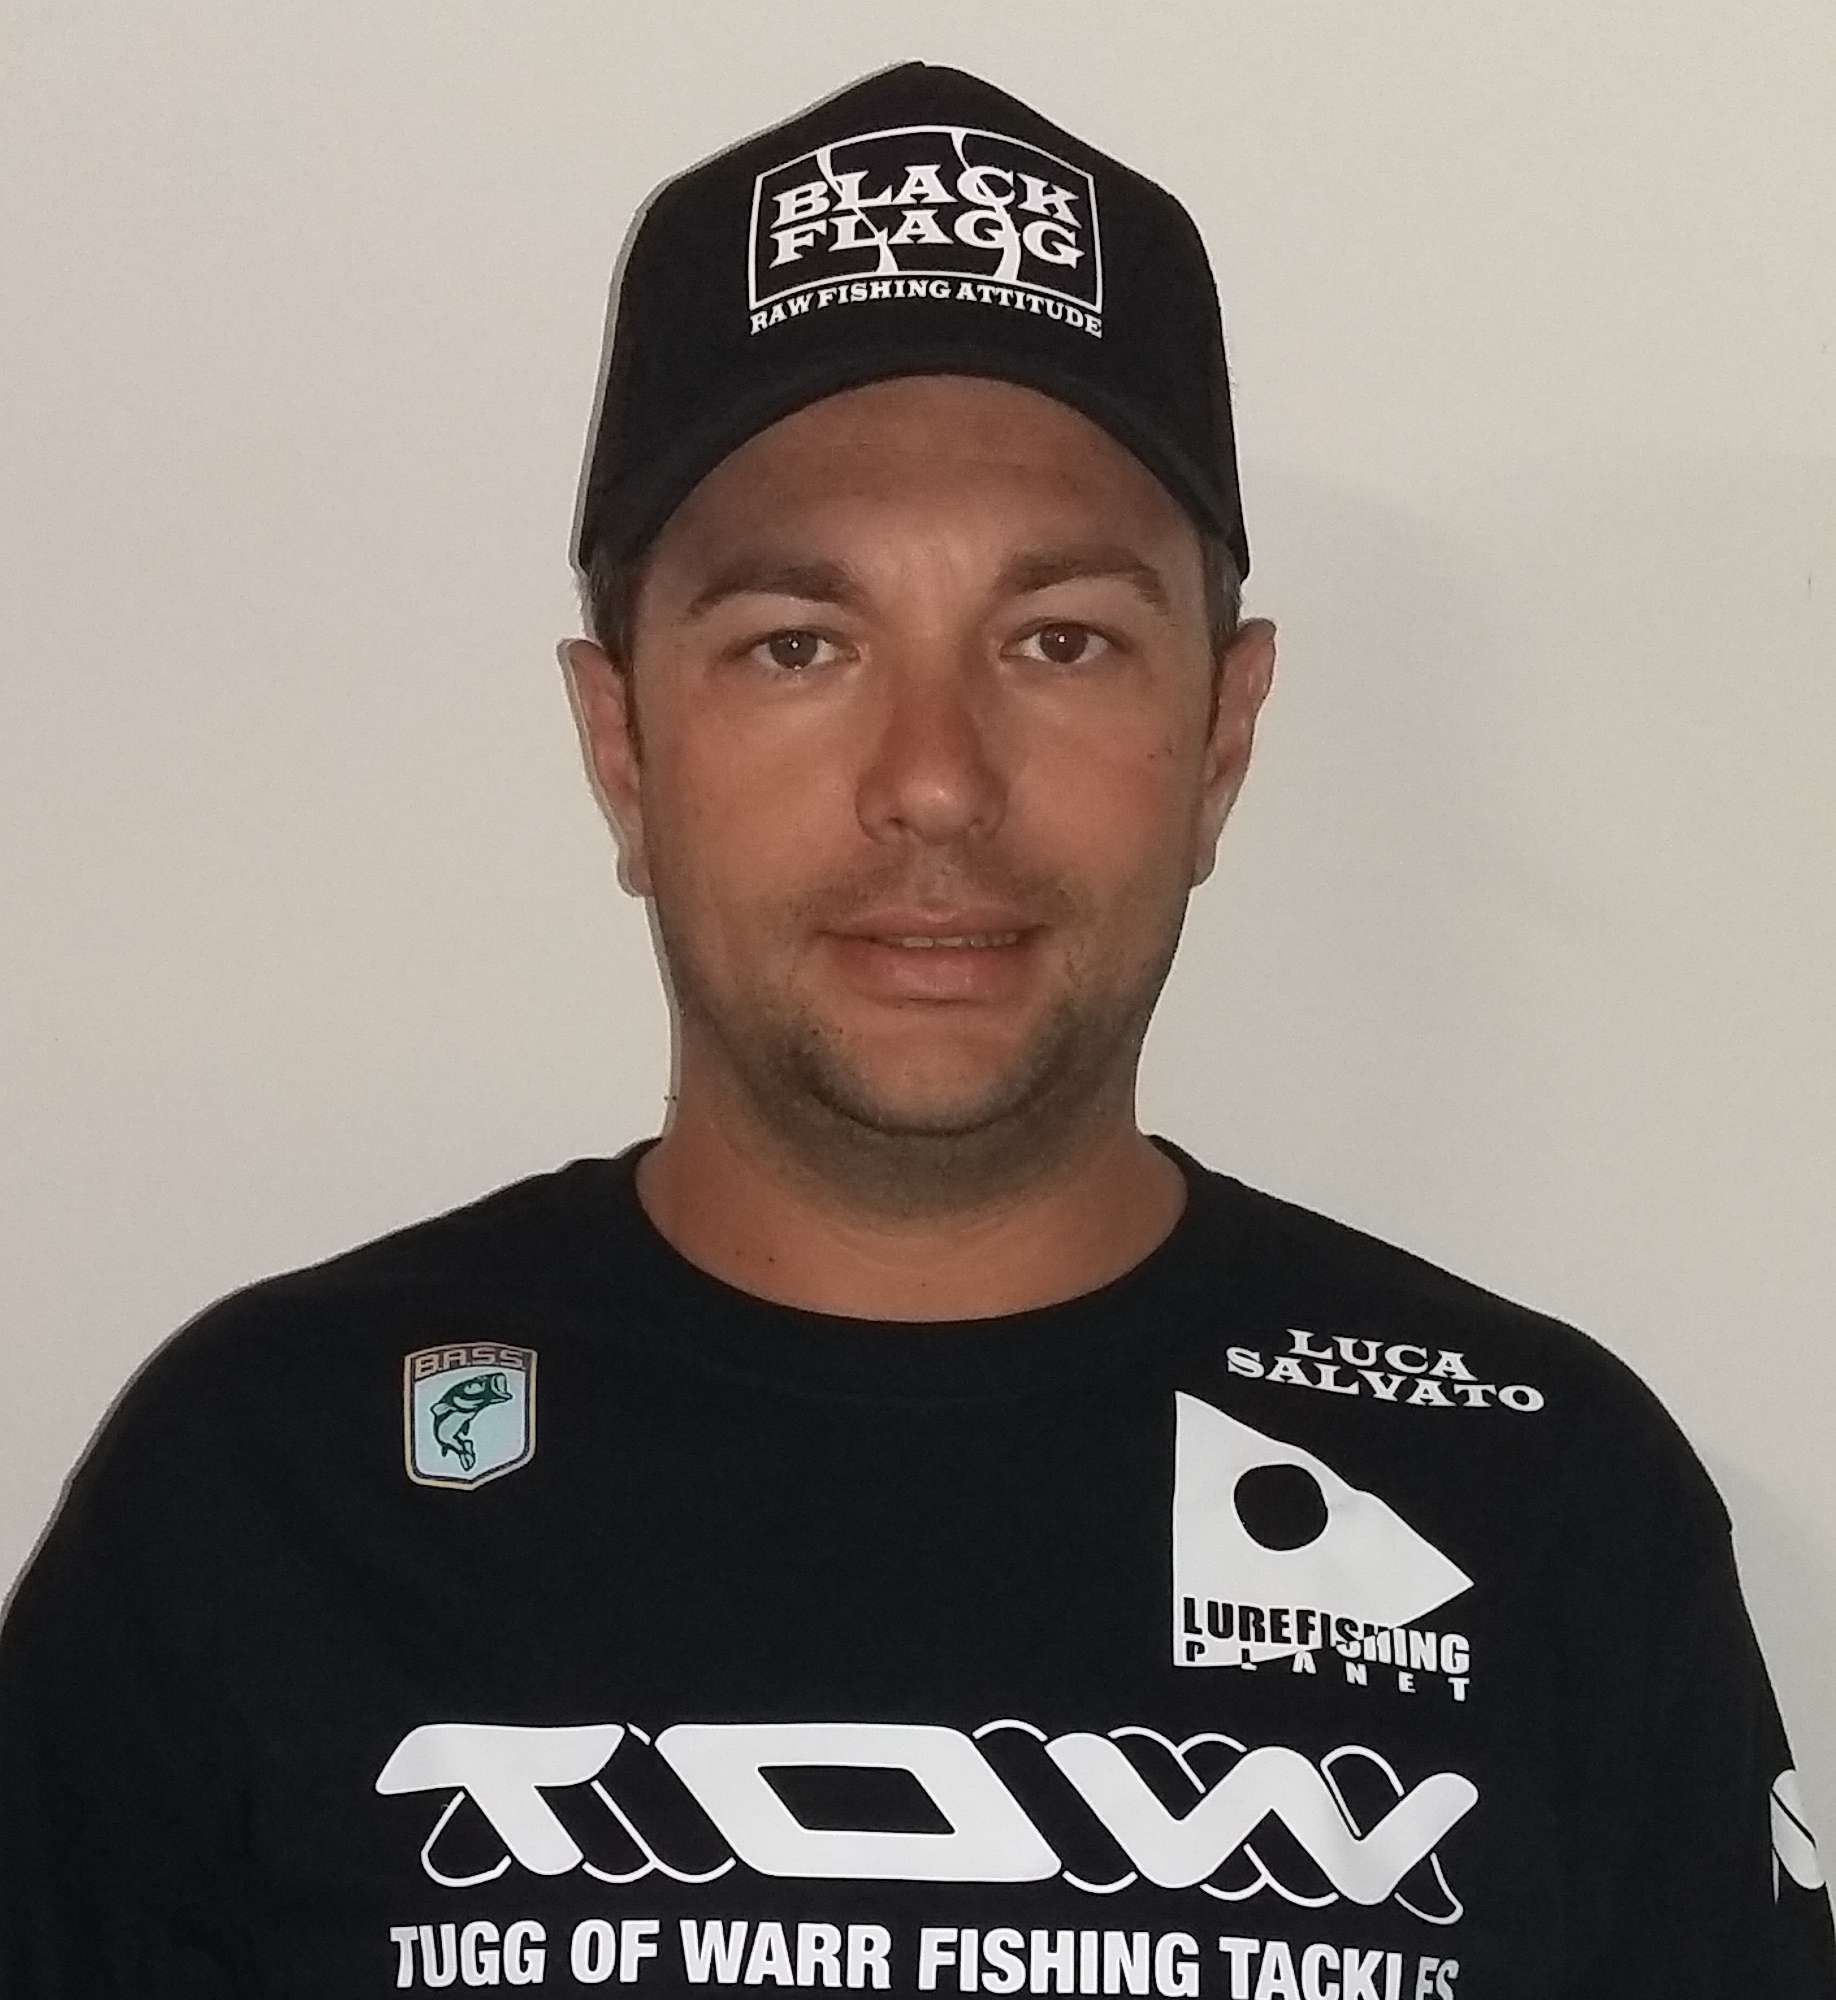 Luca Salvato <br>
Italy Boater <br>
Luca Salvato is crossing the pond with his cousin, Mauro Salvato, to compete on behalf of Italy. Heâs a member of Spinning Club Beba, and he spends his days as an air worker. For fun in Curtarolo, Salvato goes snowboarding. His sponsor is Black Flagg & Tow. 